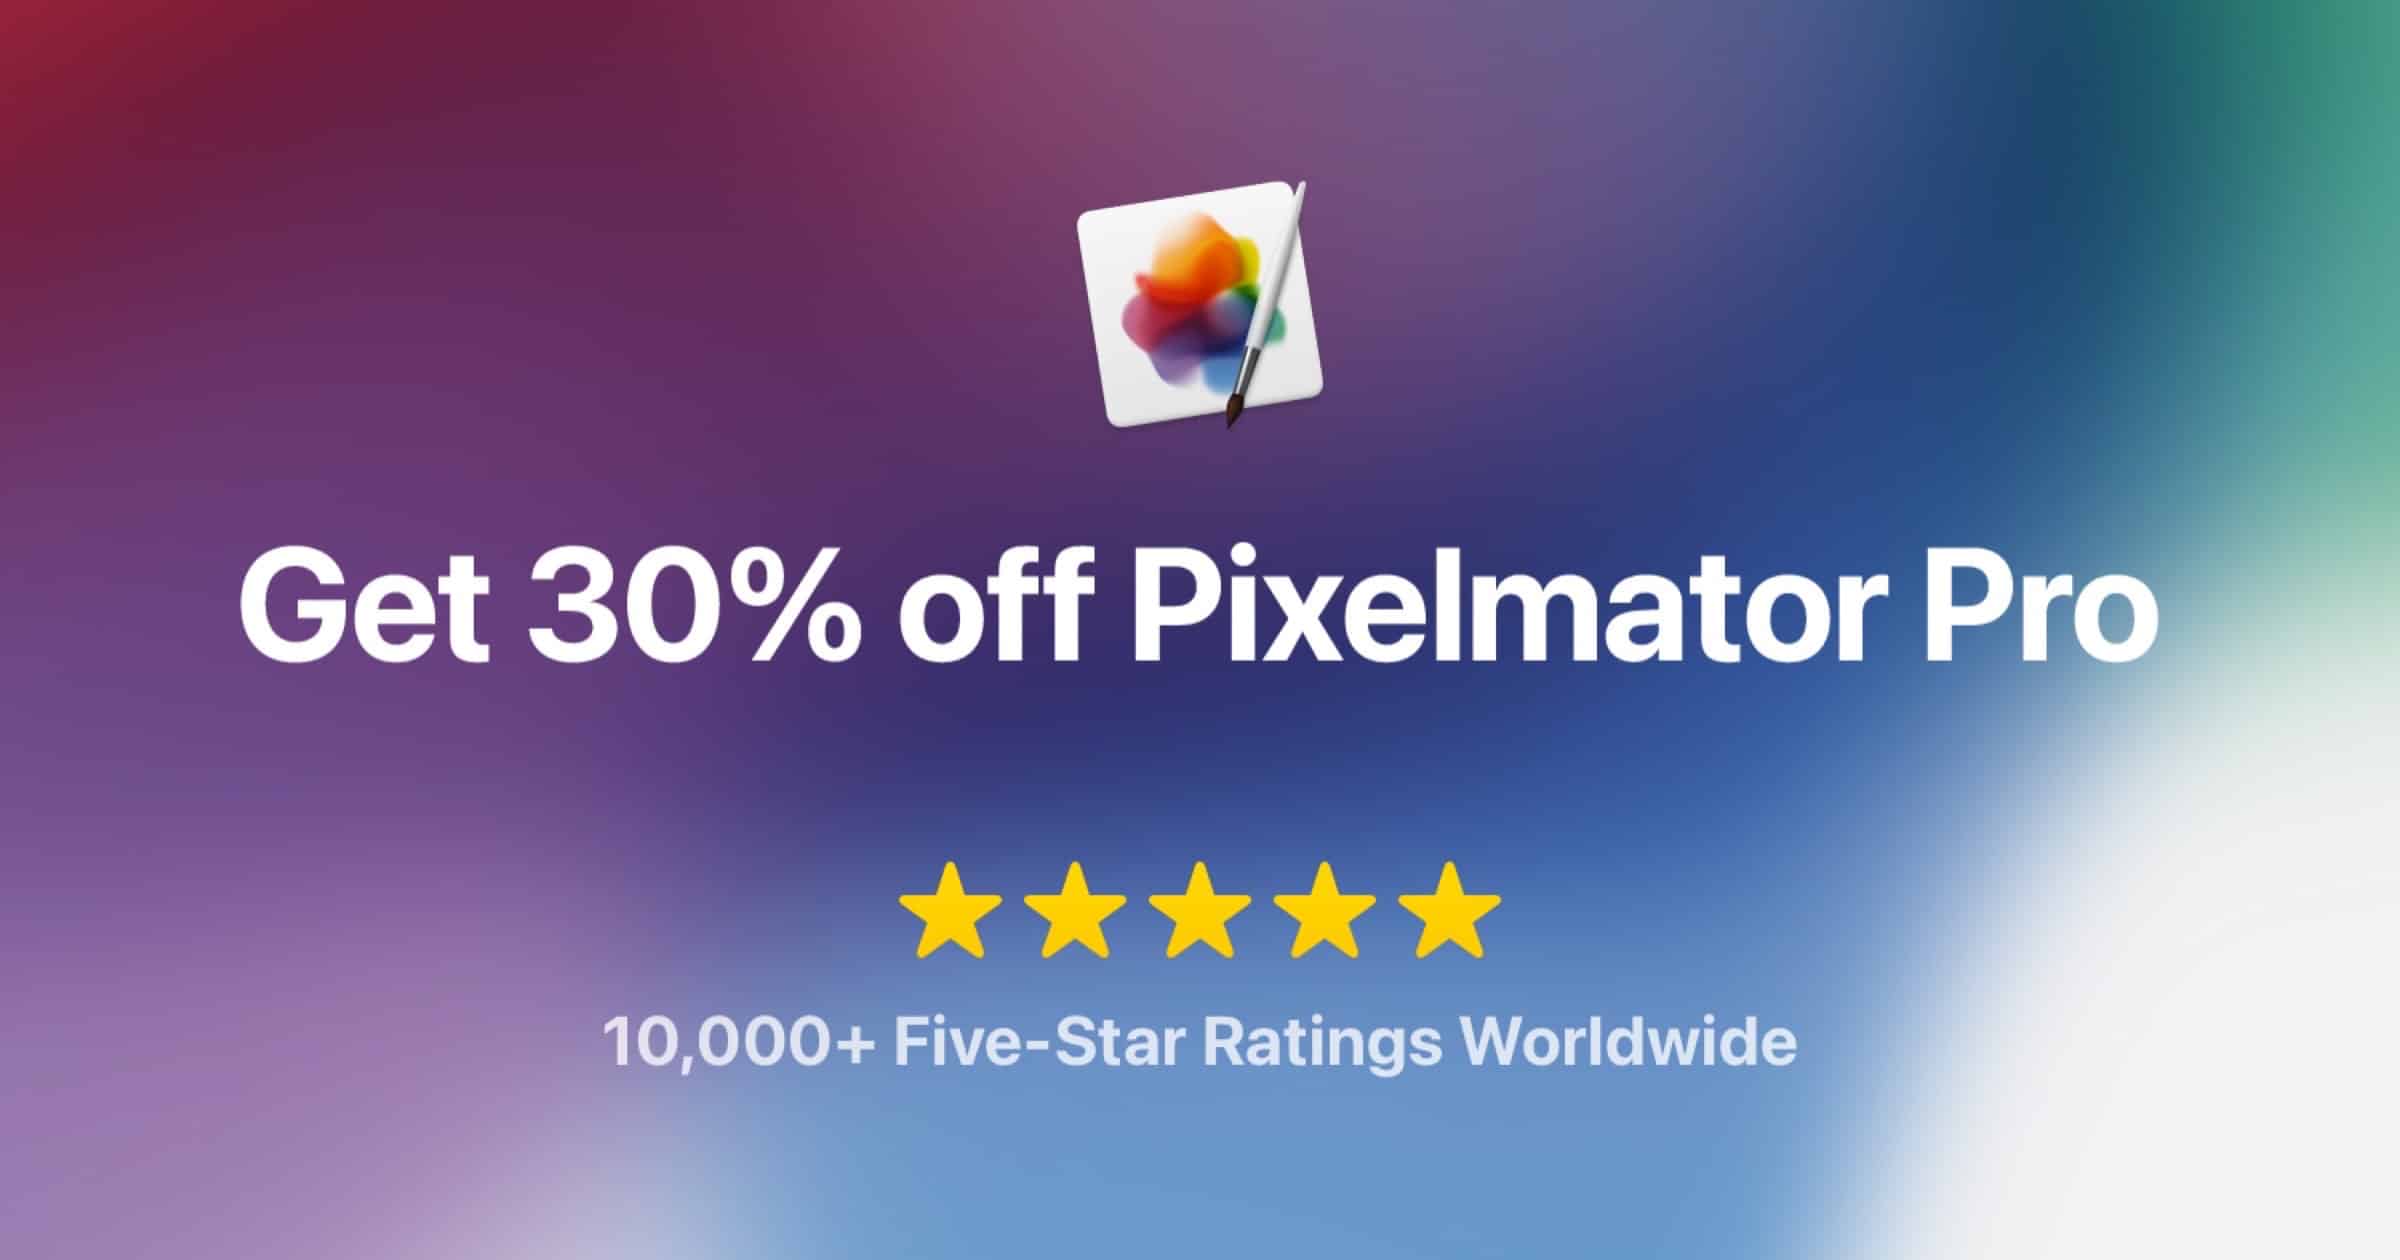 Pixelmator Pro on Sale After Reaching 10,000 Five Star Reviews